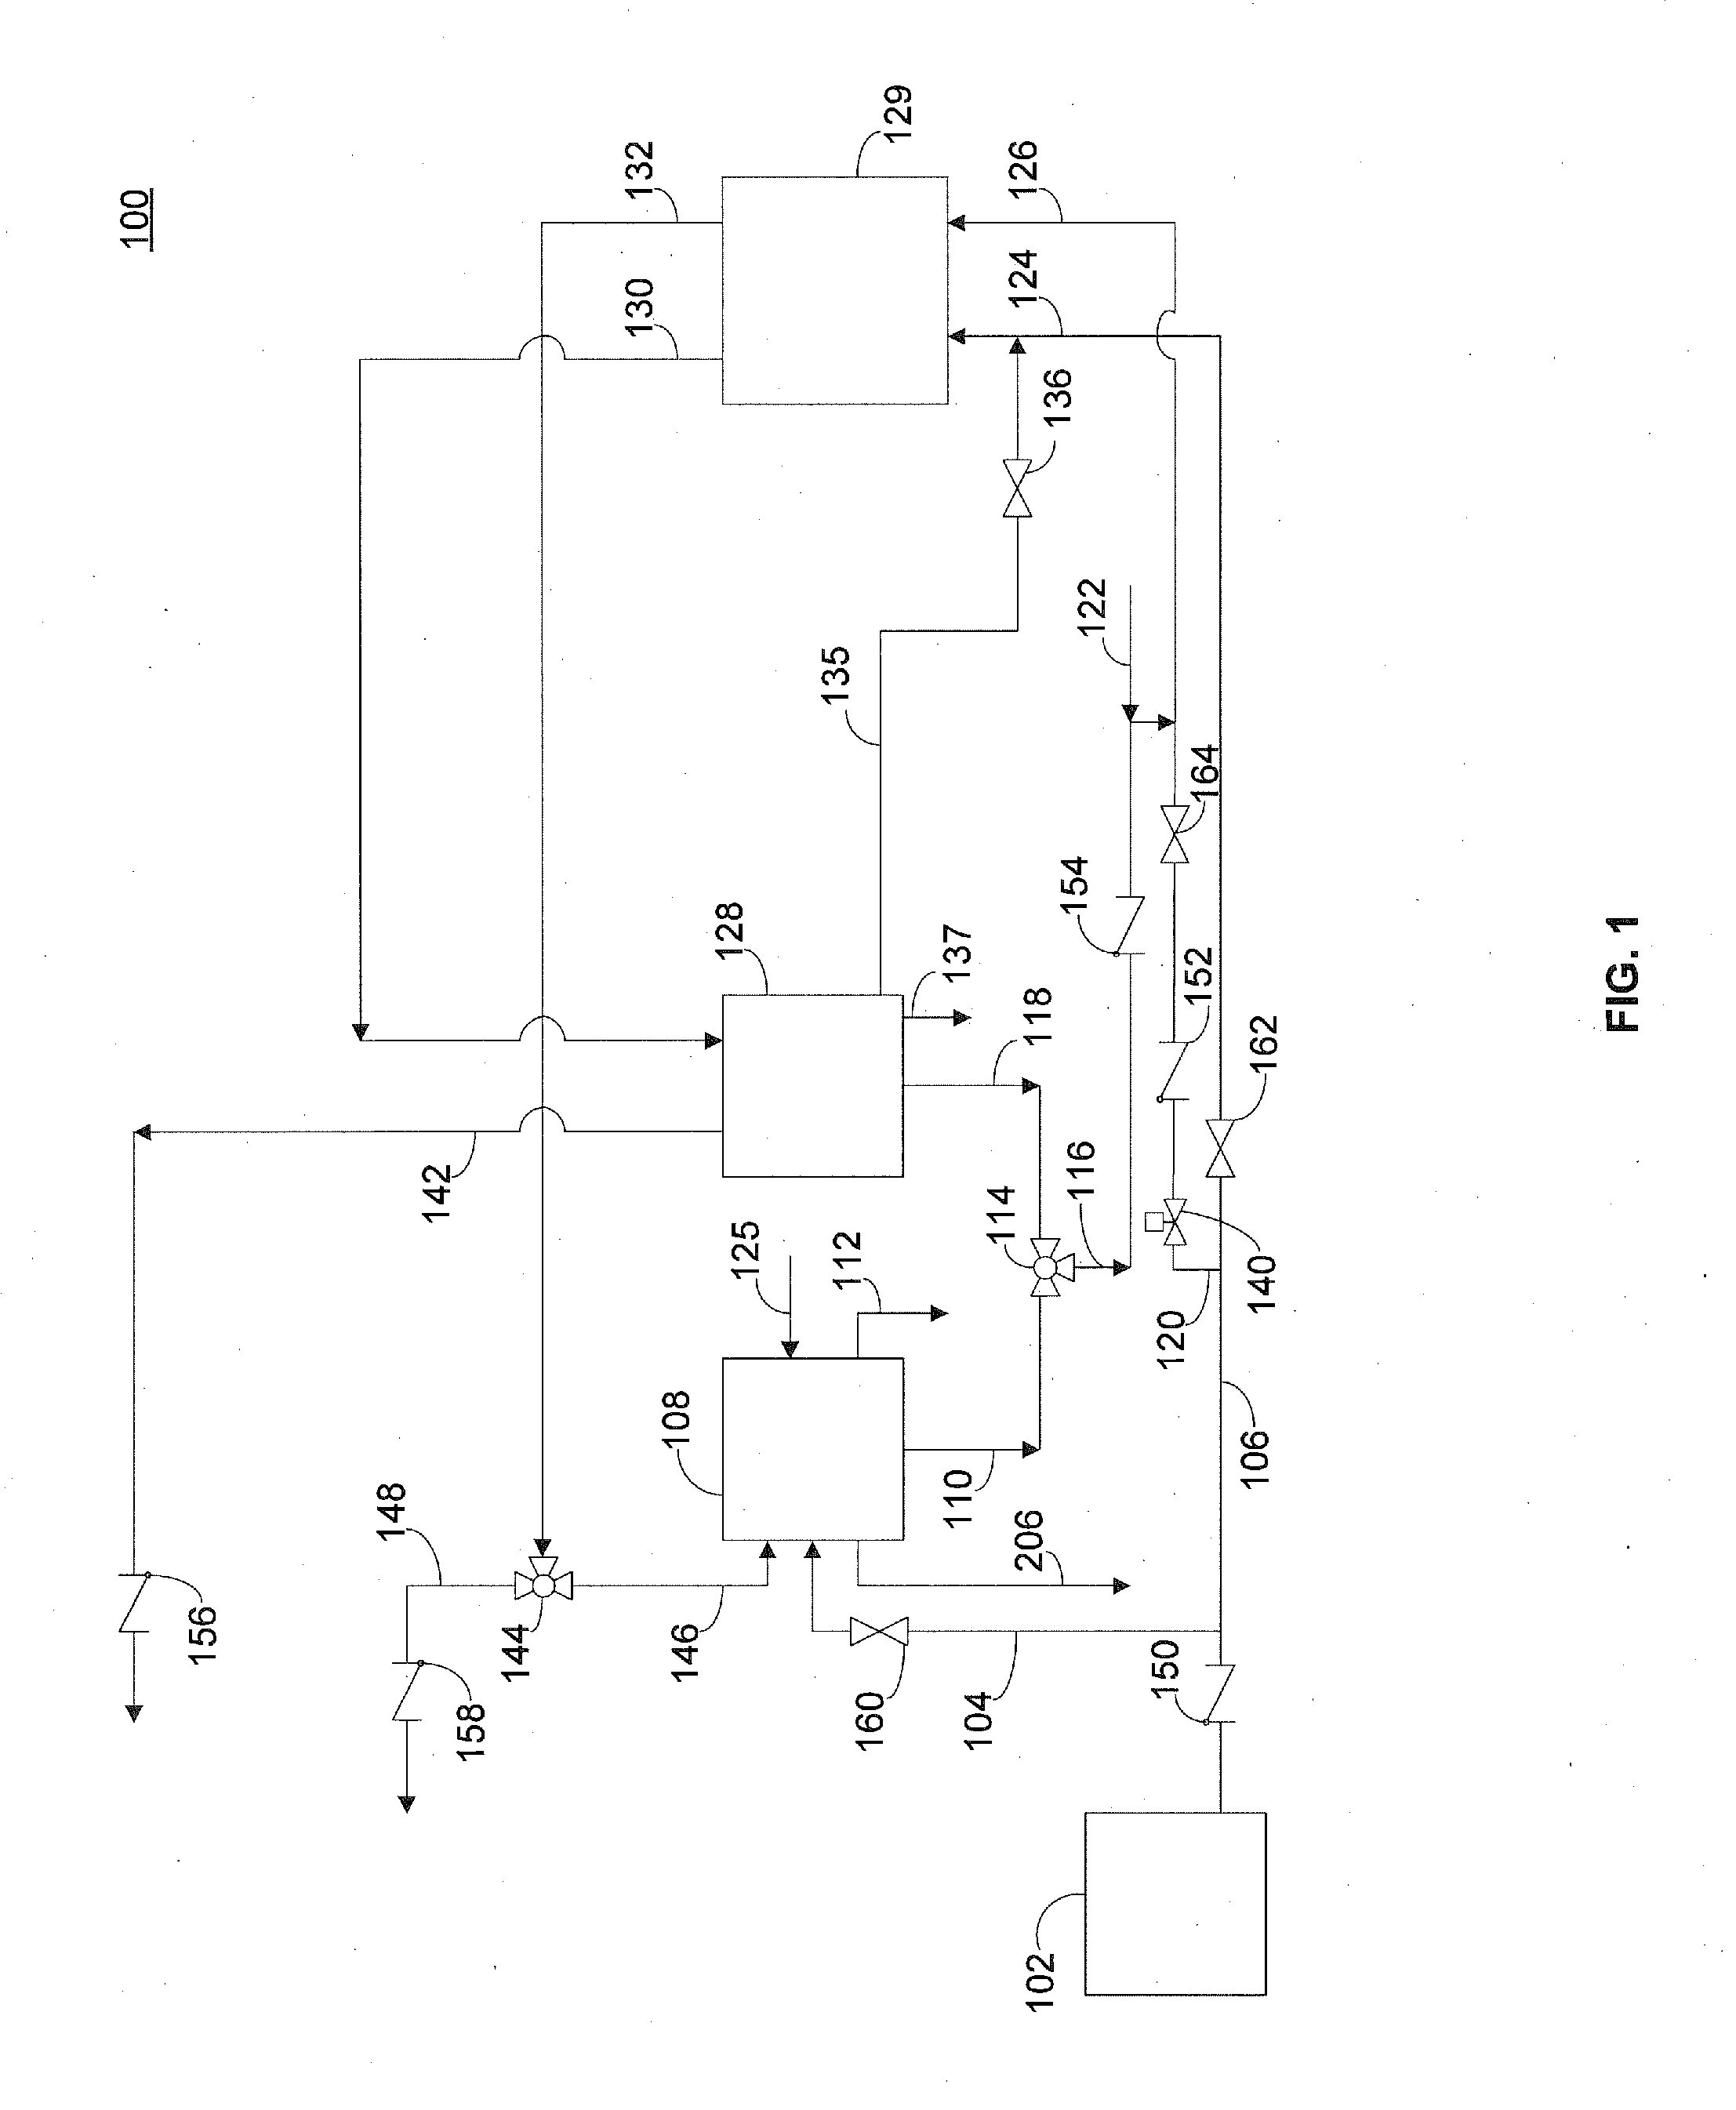 Independent production of electrolyzed acidic water and electrolyzed basic water